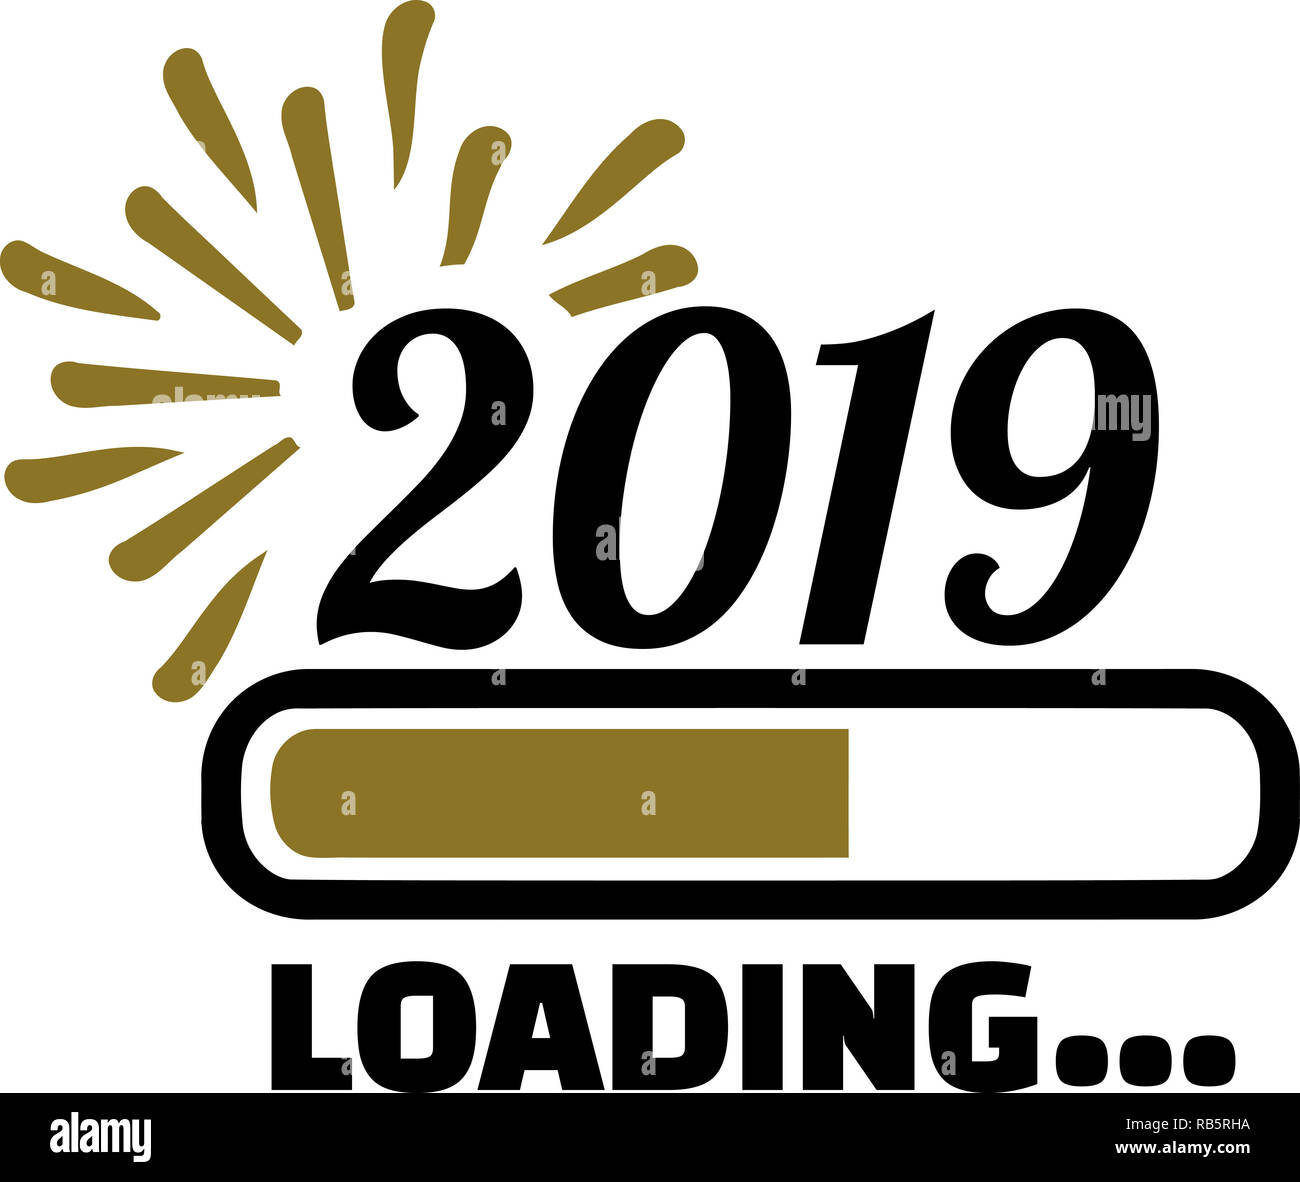 2019 Loading with bar fireworks Stock Photo